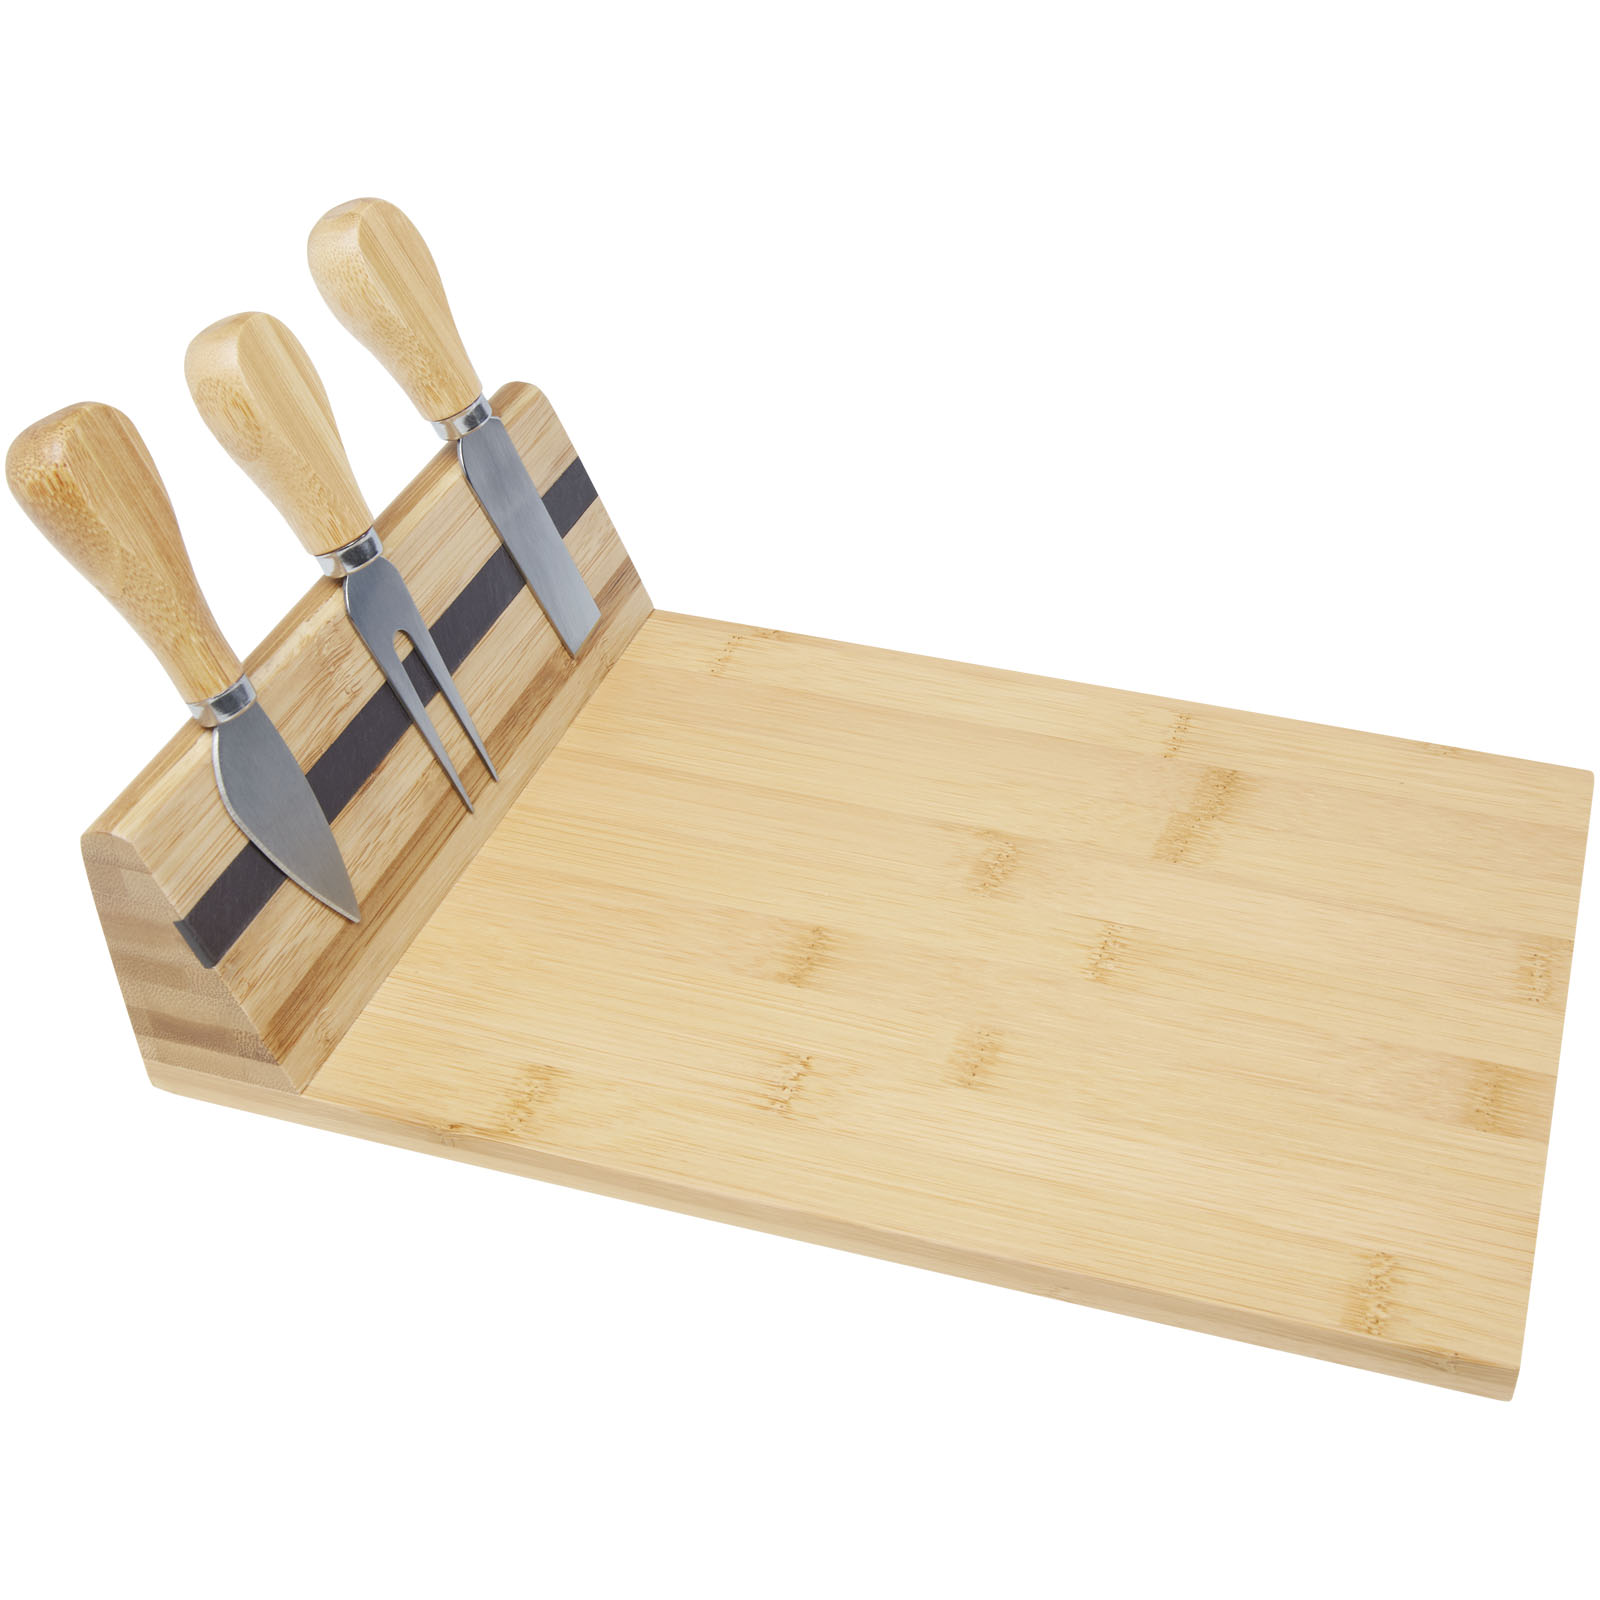 Advertising Serving Sets - Mancheg bamboo magnetic cheese board and tools - 0